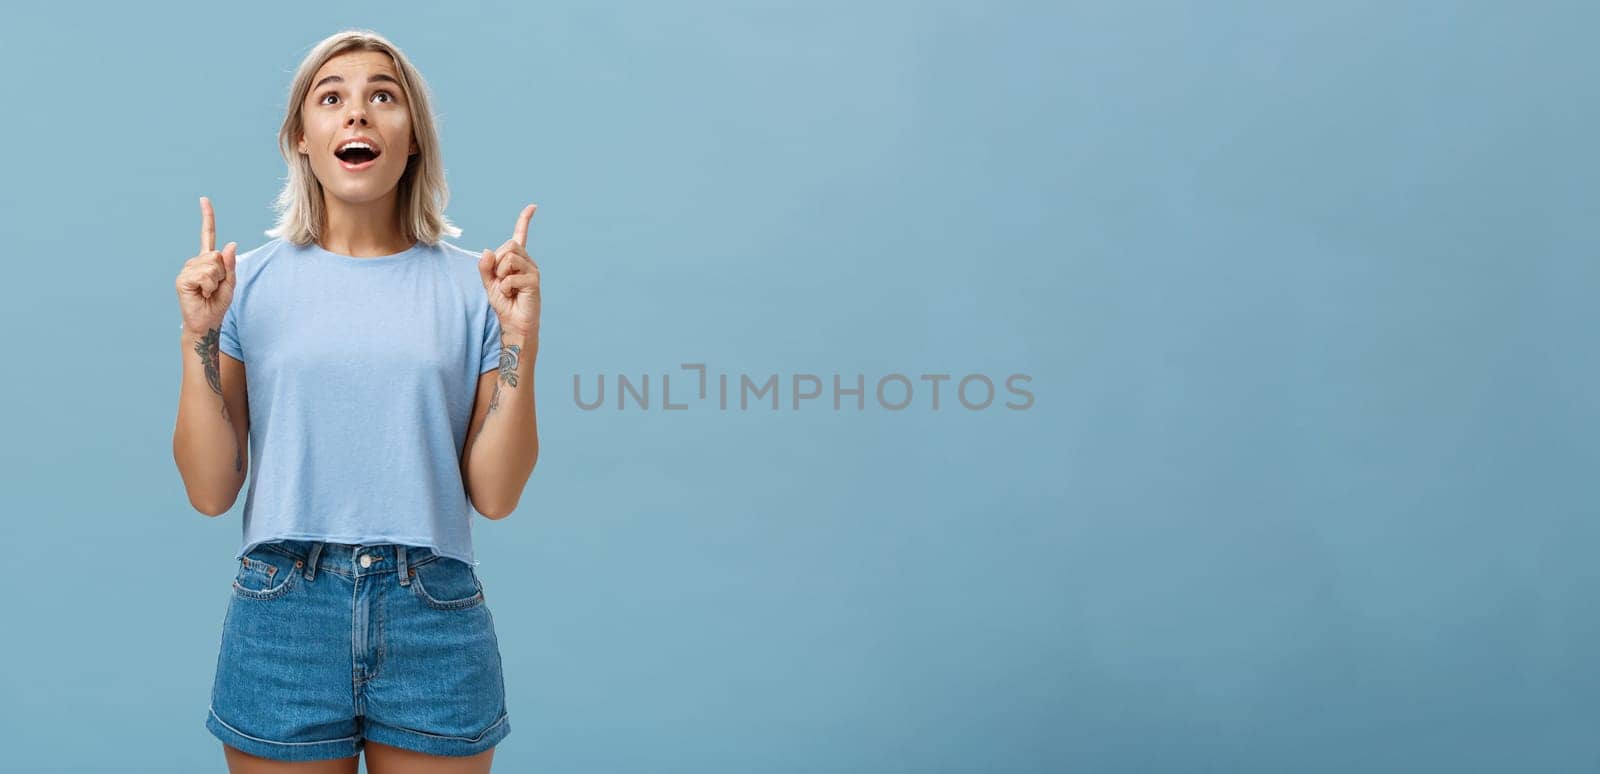 Lifestyle. Indoor shot of impressed speechless attractive fair-haired female student in casual t-shirt and denim shorts dropping jaw from amazement pointing and looking up intrigued over blue wall.